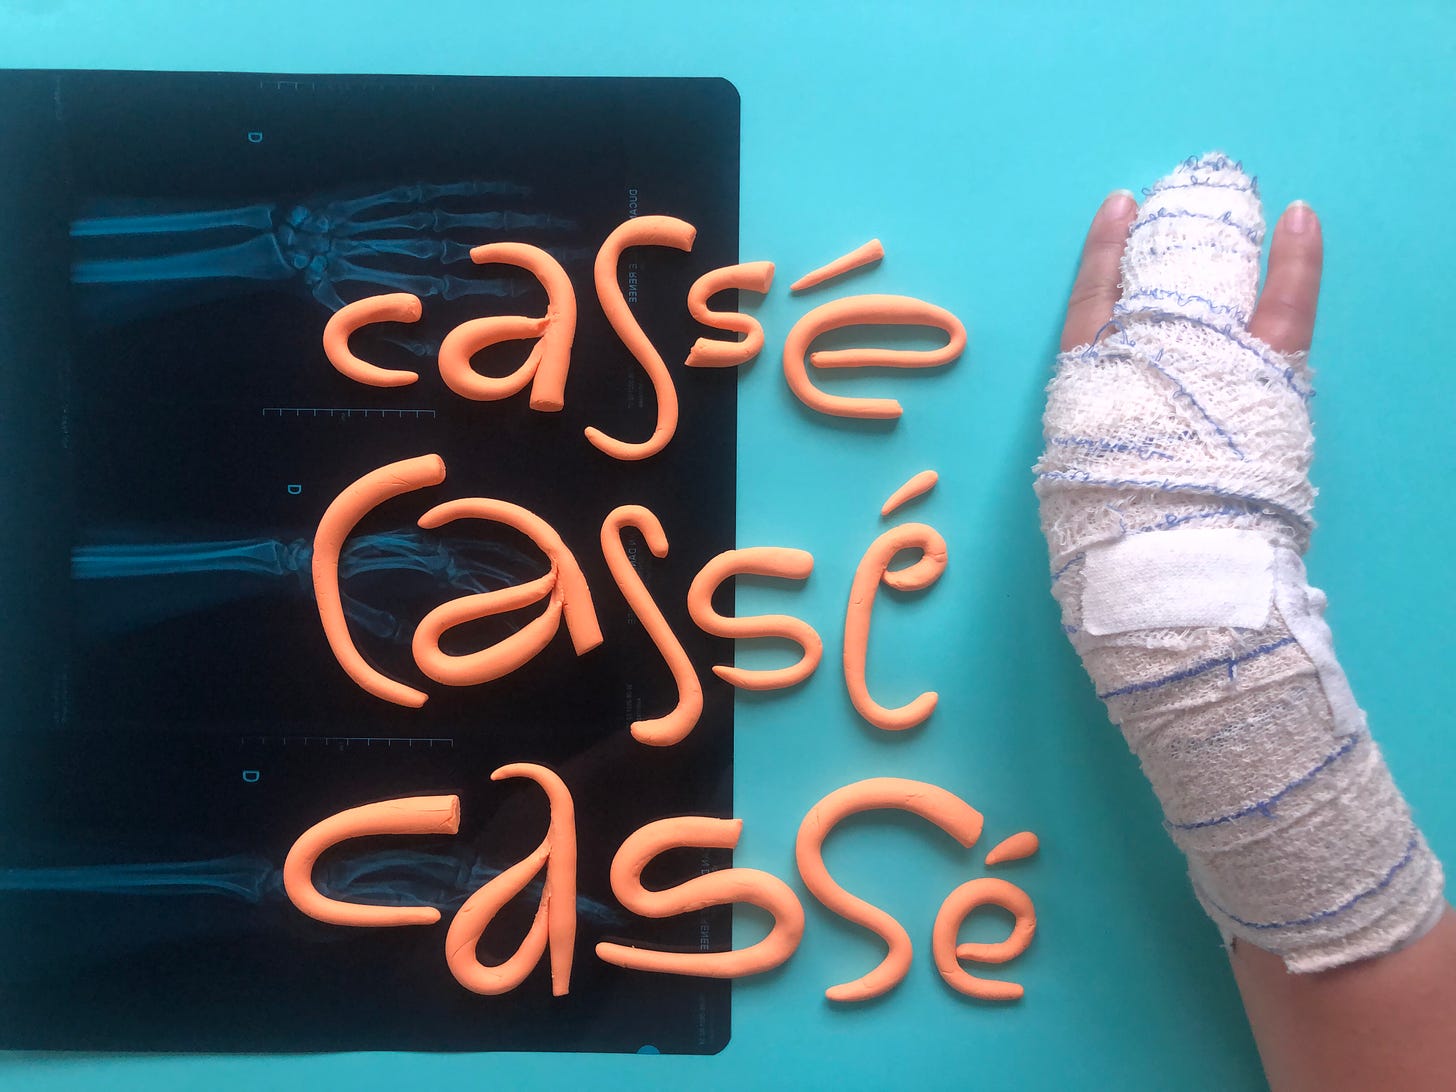 Clay letters that read "Cassé cassé cassé" or "broken broken broken" on a paper and xray background. On the right is a broken hand wrapped in bandages.